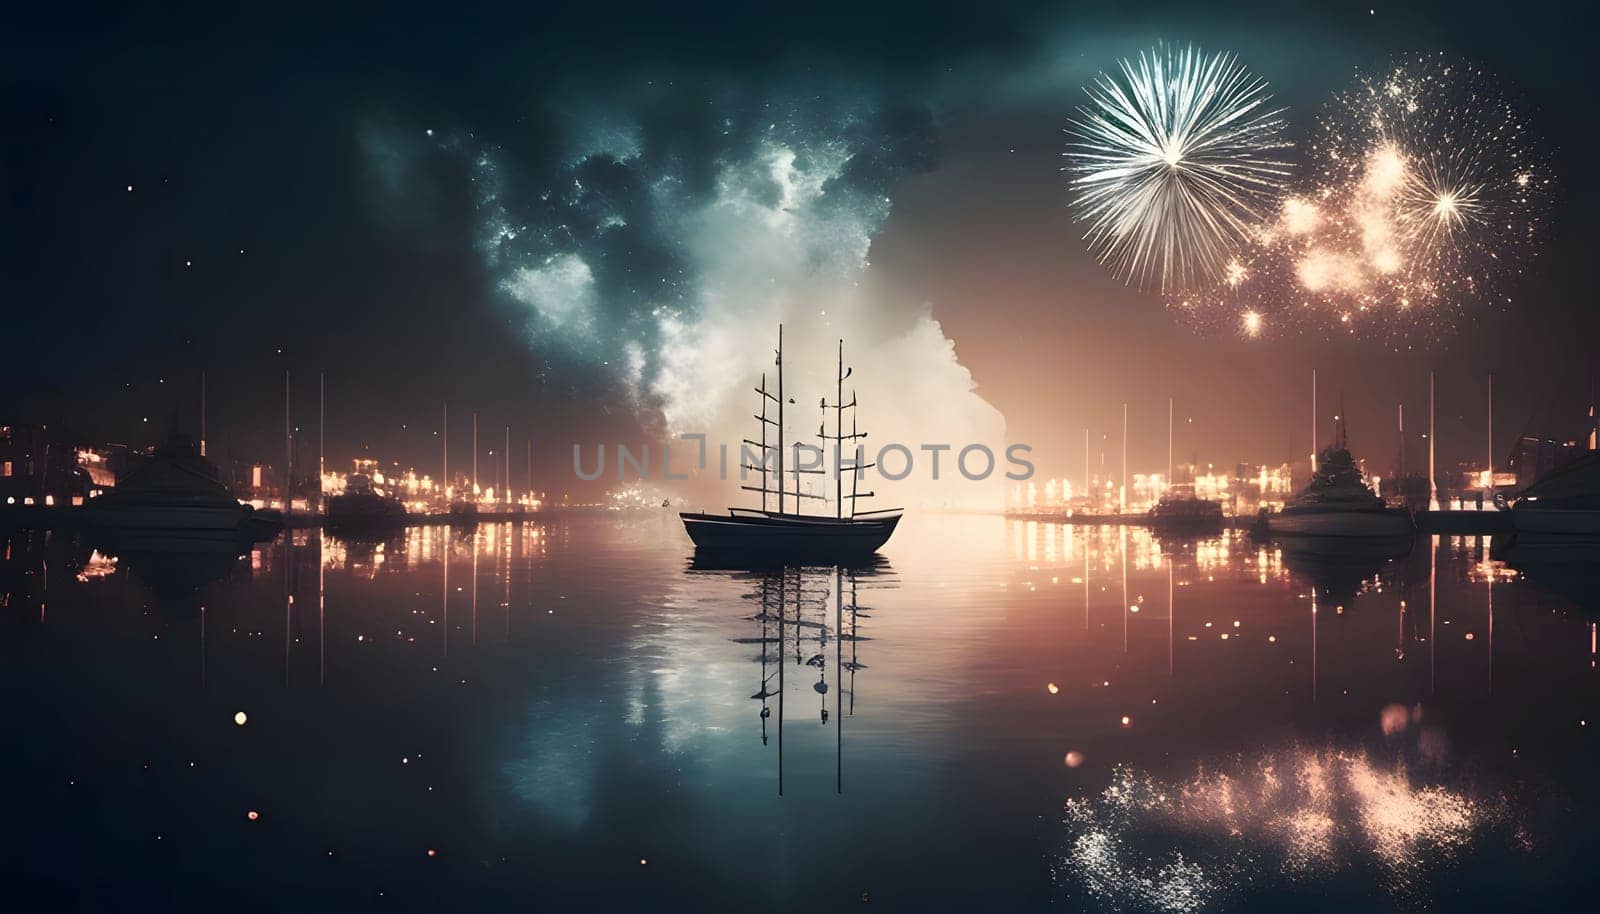 Flowing ships and firing of colorful fireworks against the night sky. New Year's fun and festivities. A time of celebration and resolutions.